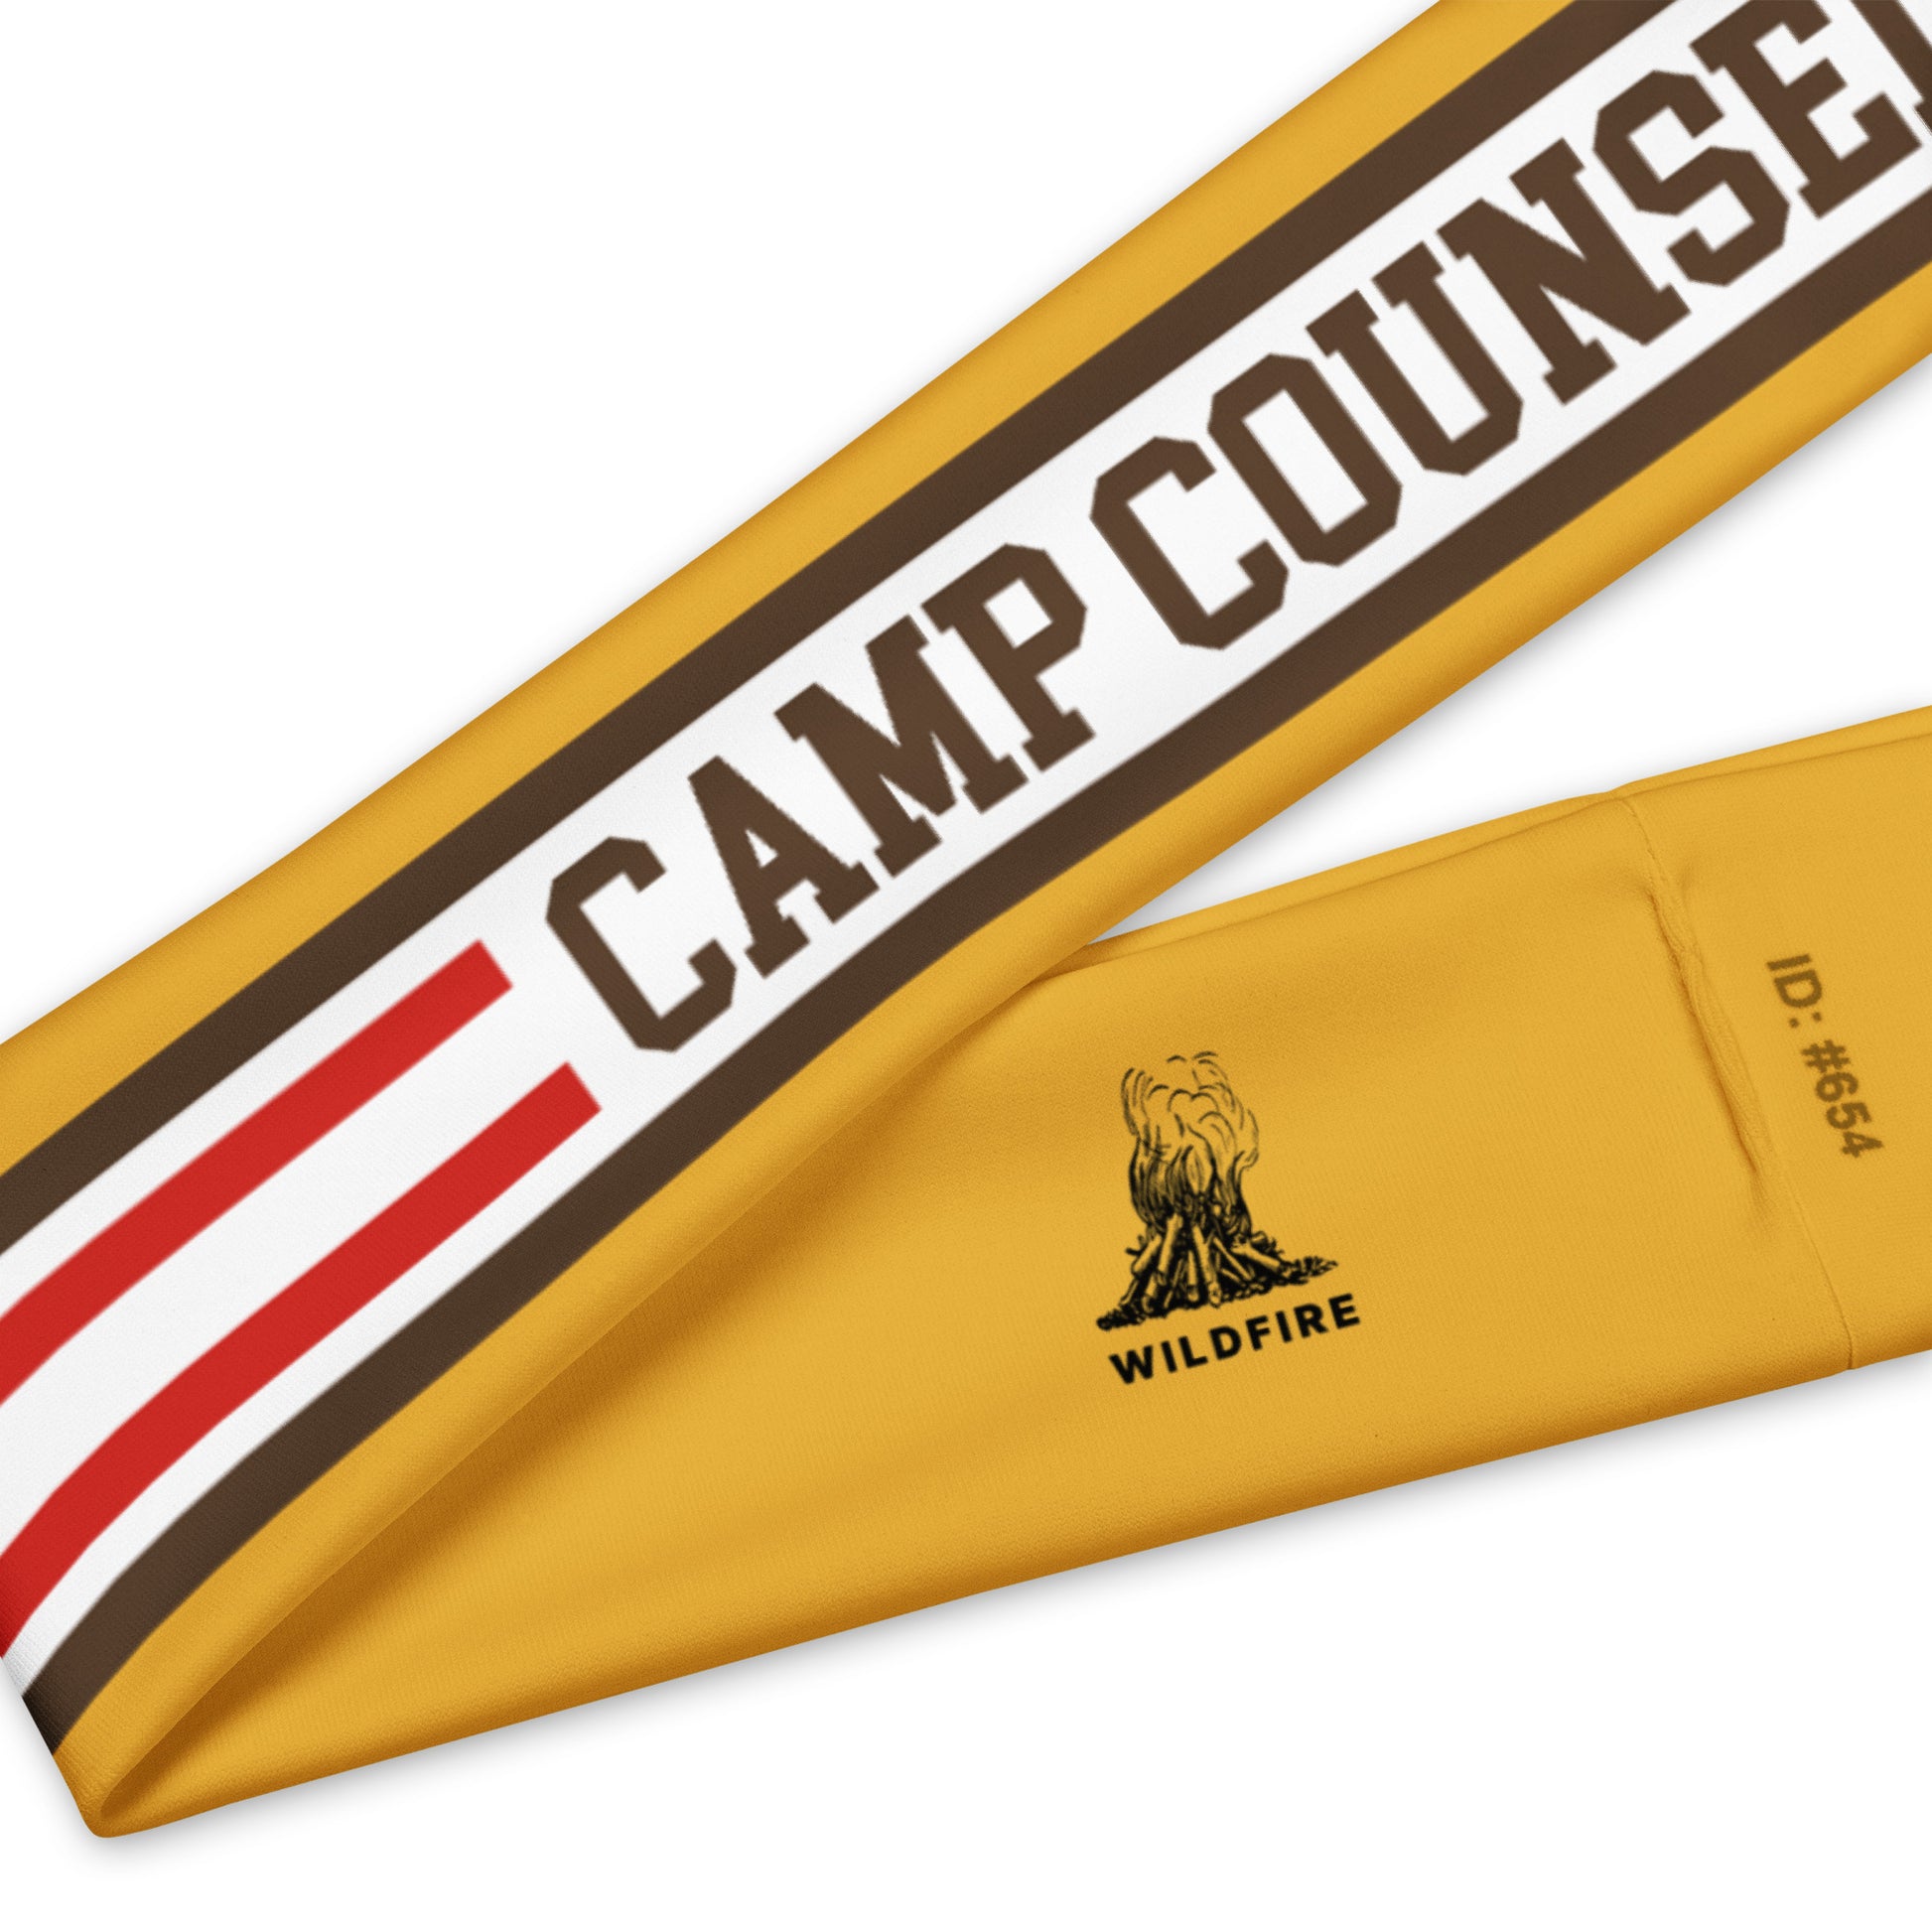 Wildfire Cigars Camp Counselor headband in gold facing the front zoomed in to inside label details